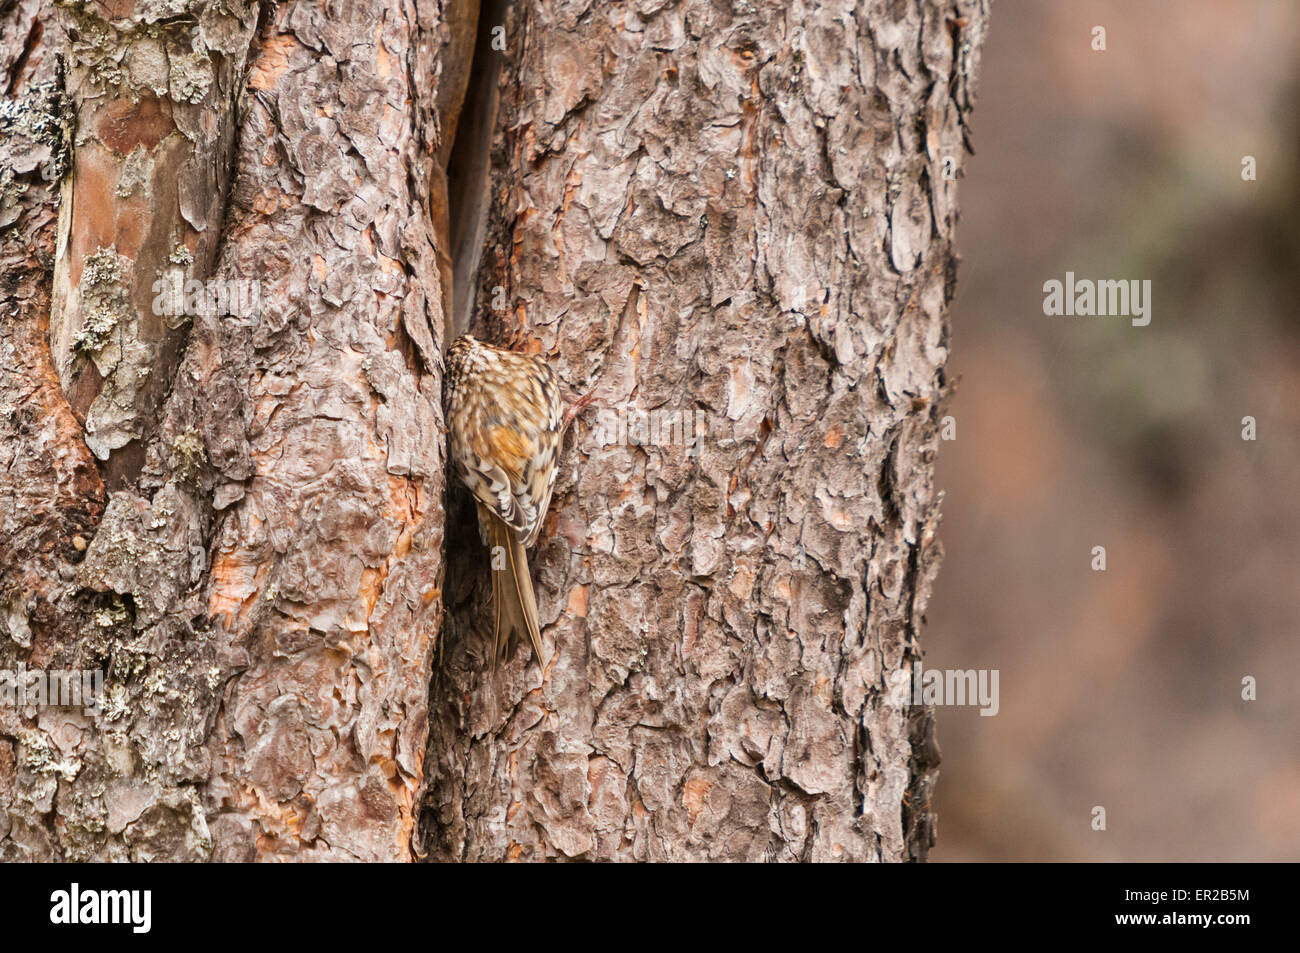 A common or Eurasian Tree Creeper, Certhia familiaris, entering it's nest in a gap in a pine tree bark. Stock Photo